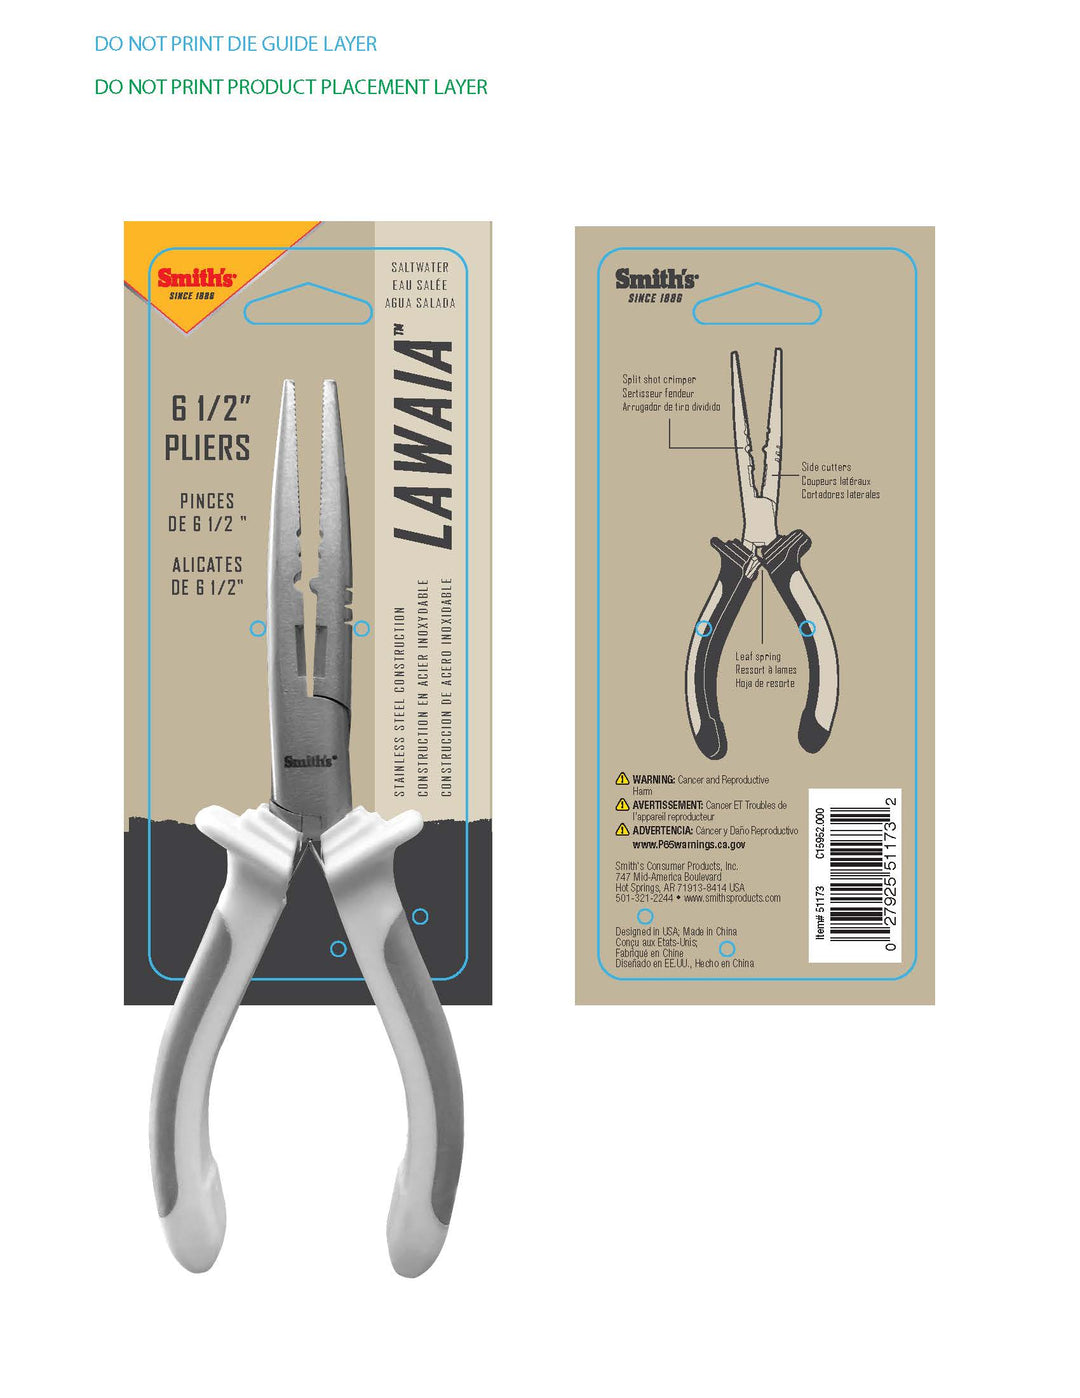 Lawaia 6 1/2" Stainless Steel Angler Pliers (Carded)